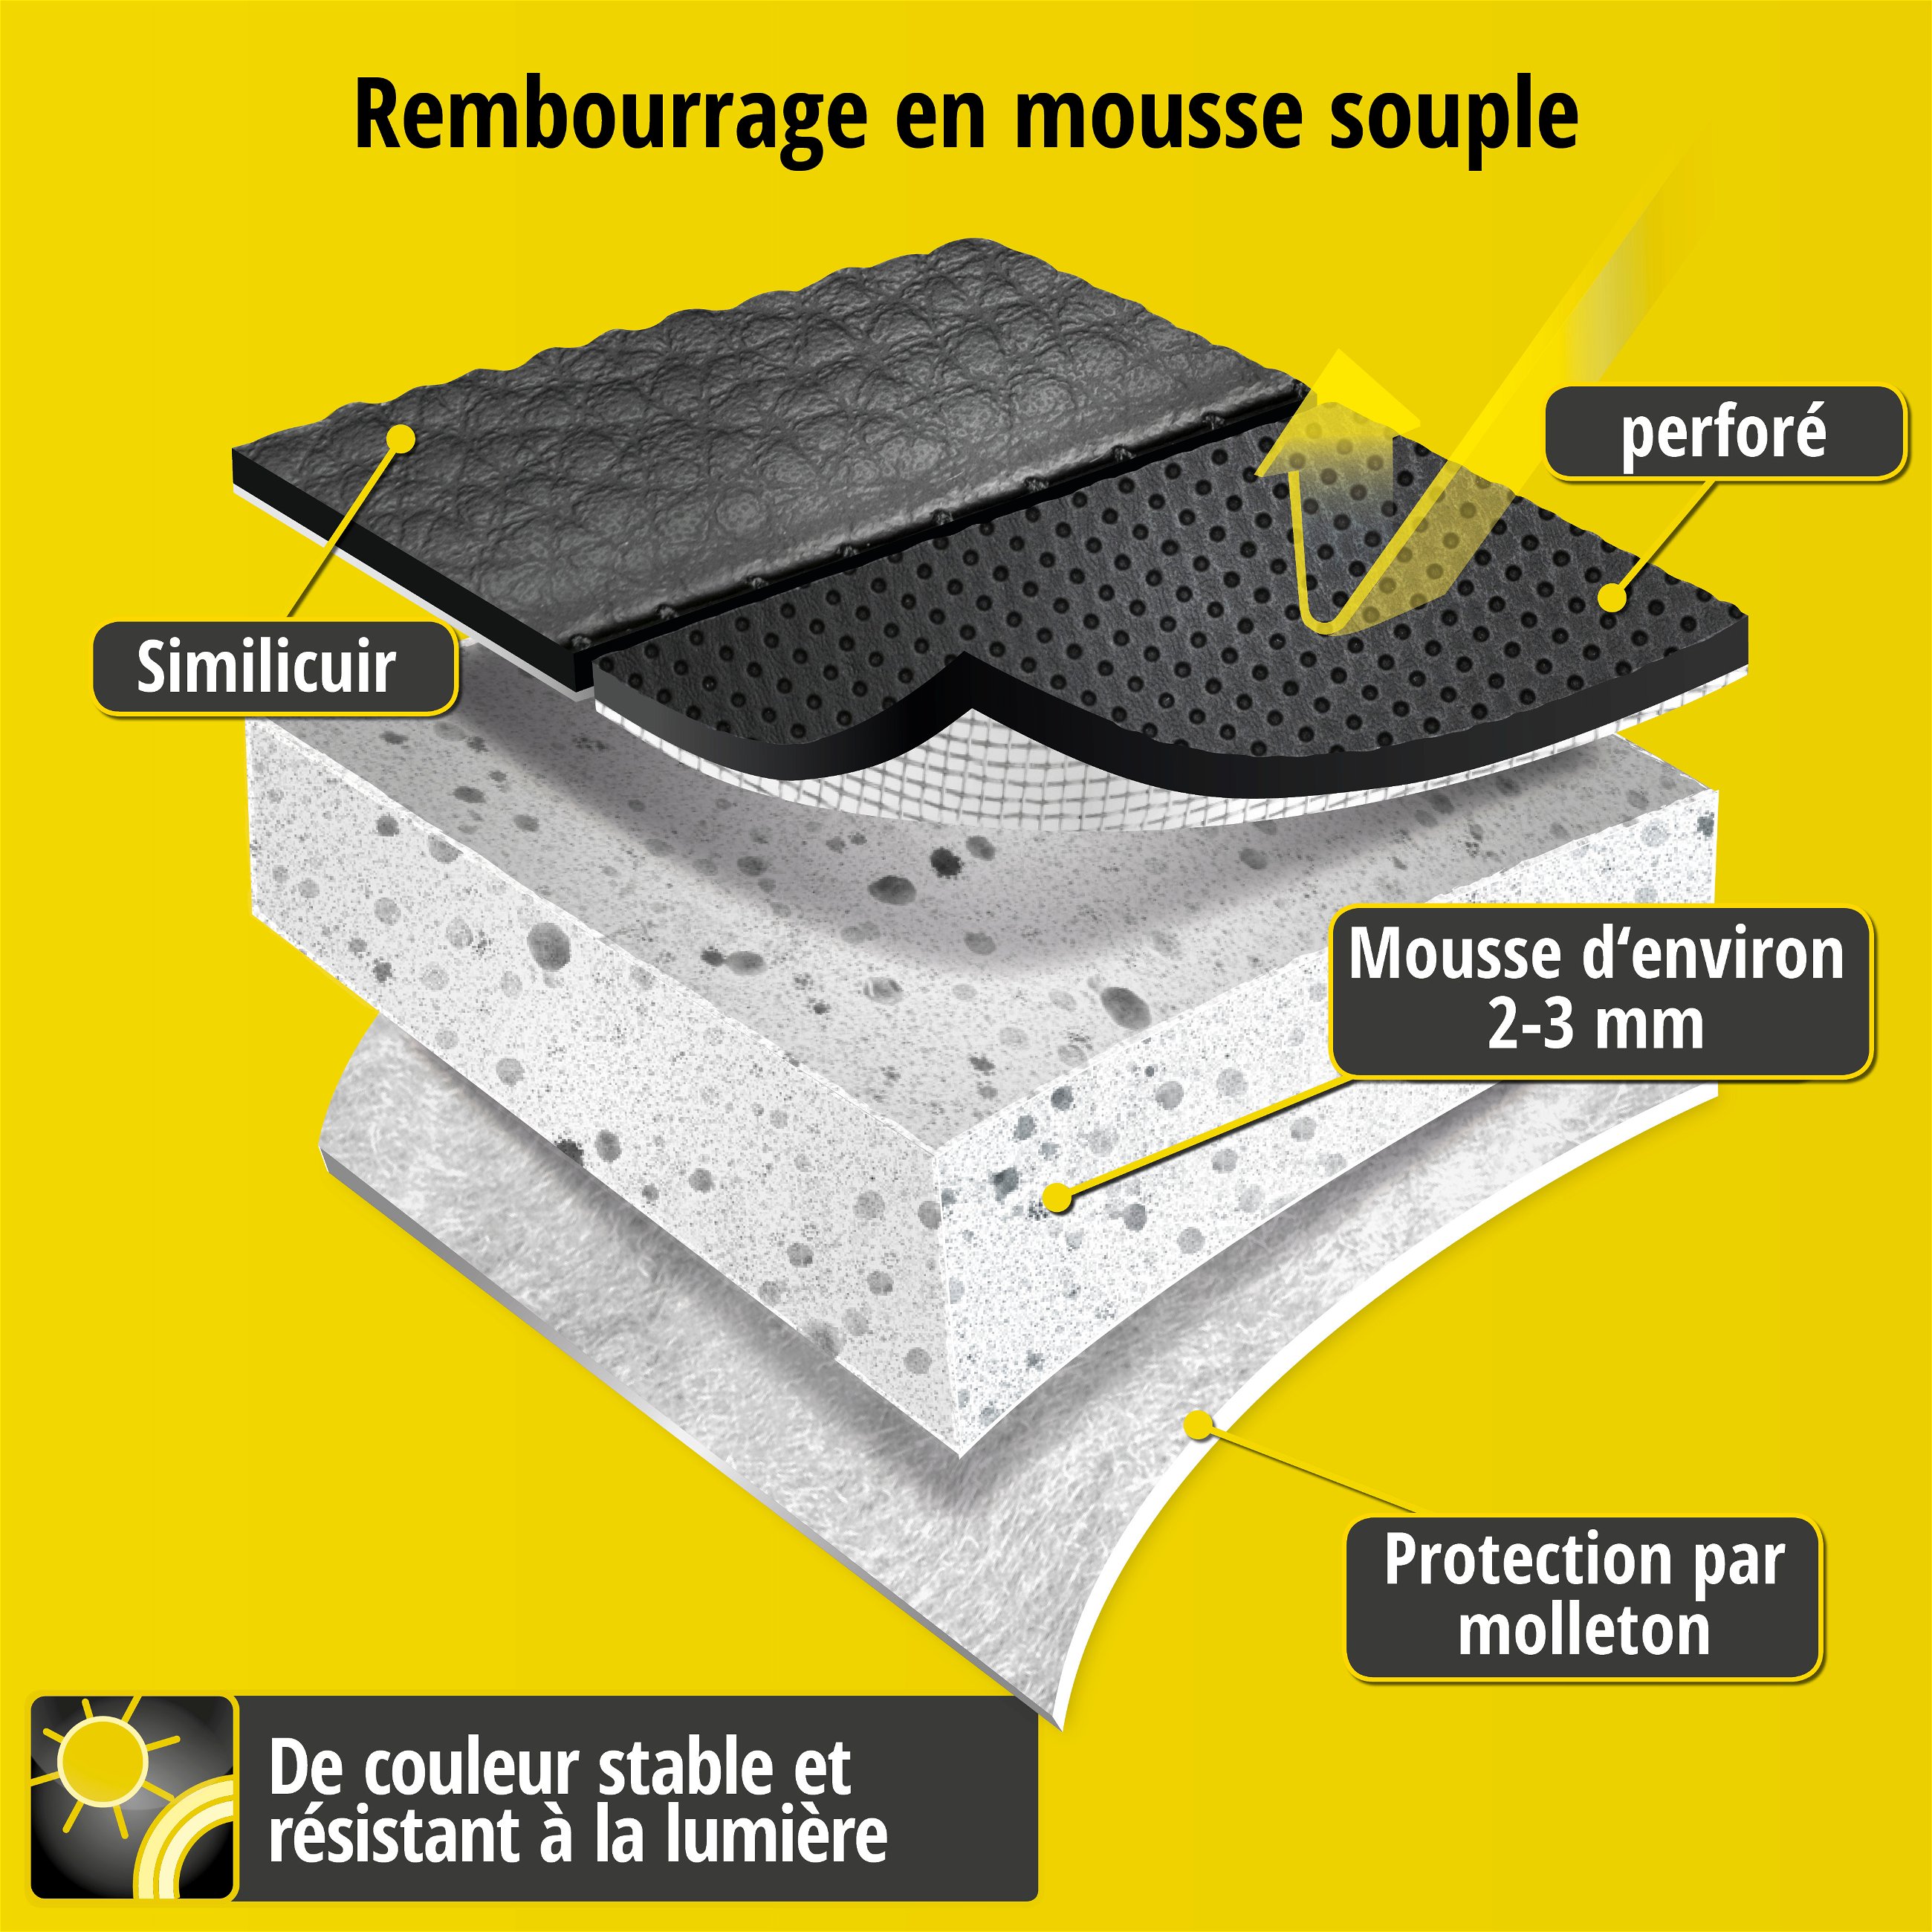 Housse de siège Robusto pour Opel Zafira/Zafira Family B A05 07/2005-05/2019, 1 housse de siège arrière pour les sièges normaux